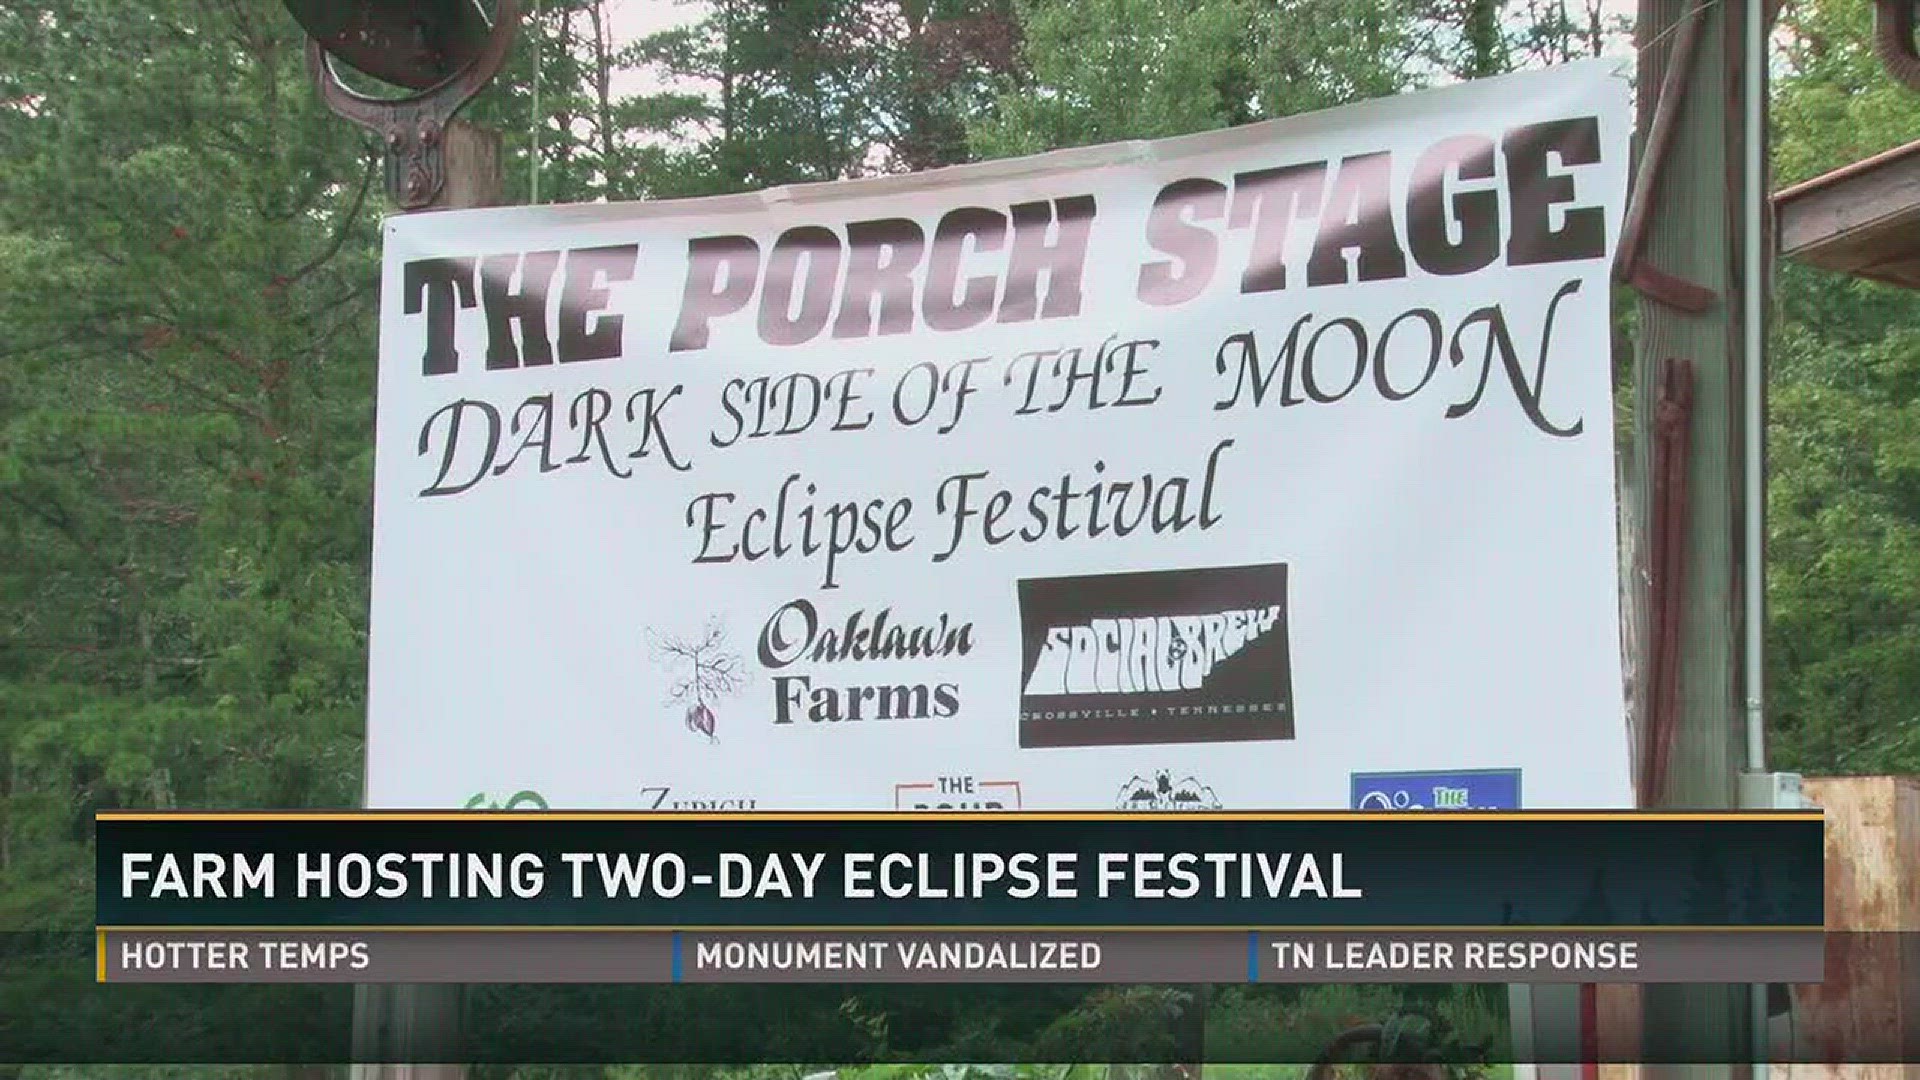 Aug. 16, 2017: Crossville is hosting a two-day Dark Side of the Moon Festival to celebrate the total solar eclipse.